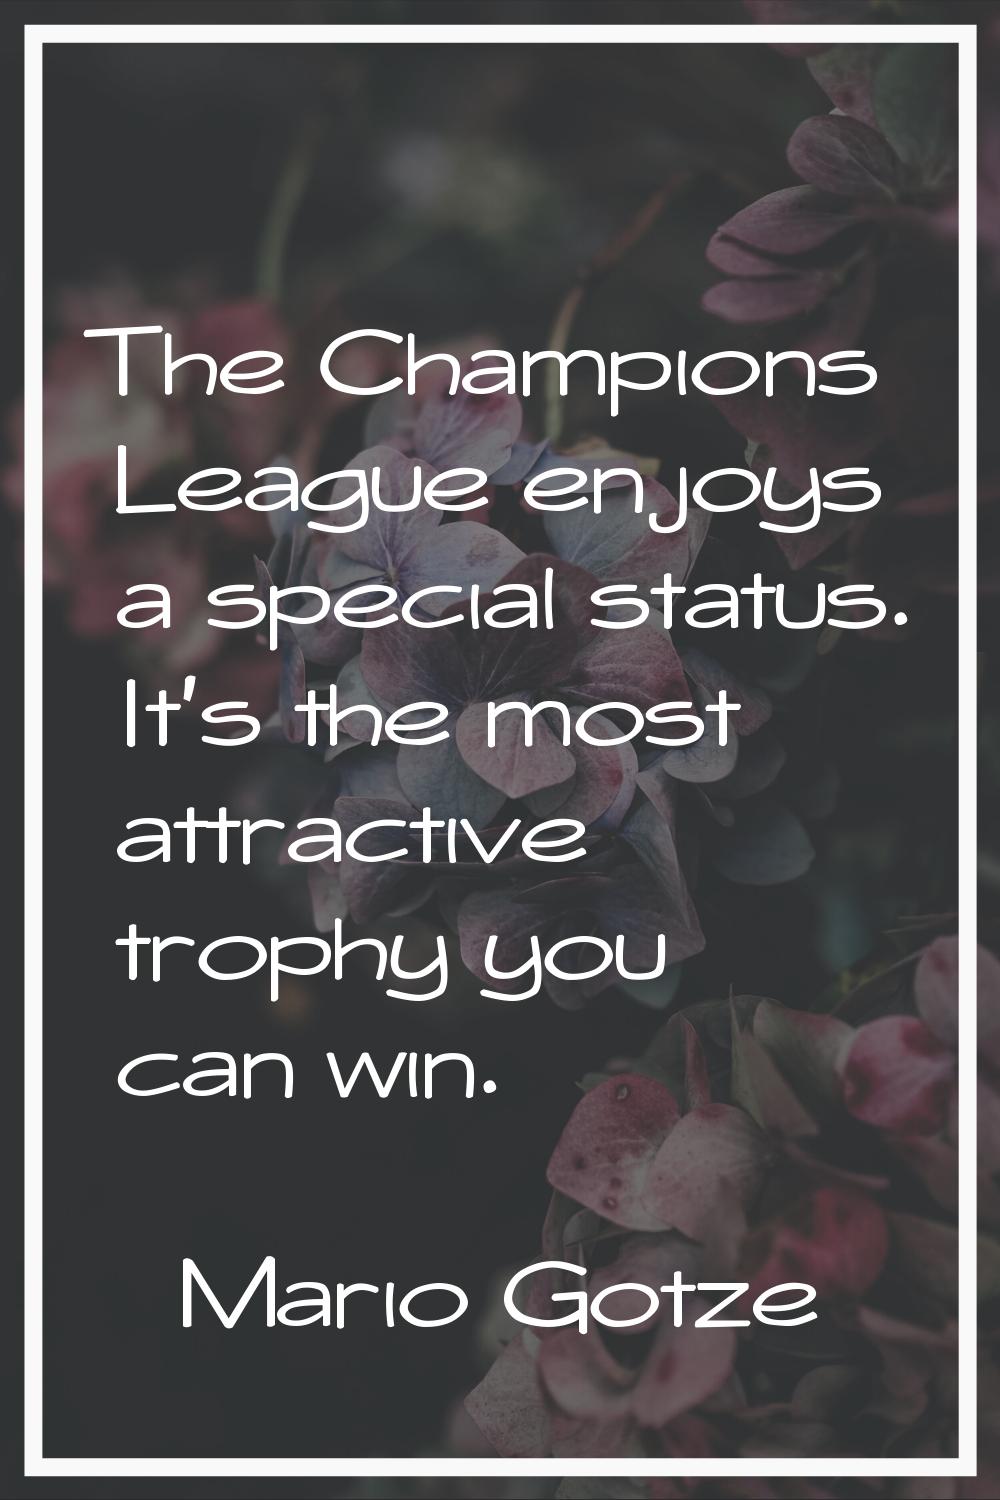 The Champions League enjoys a special status. It's the most attractive trophy you can win.